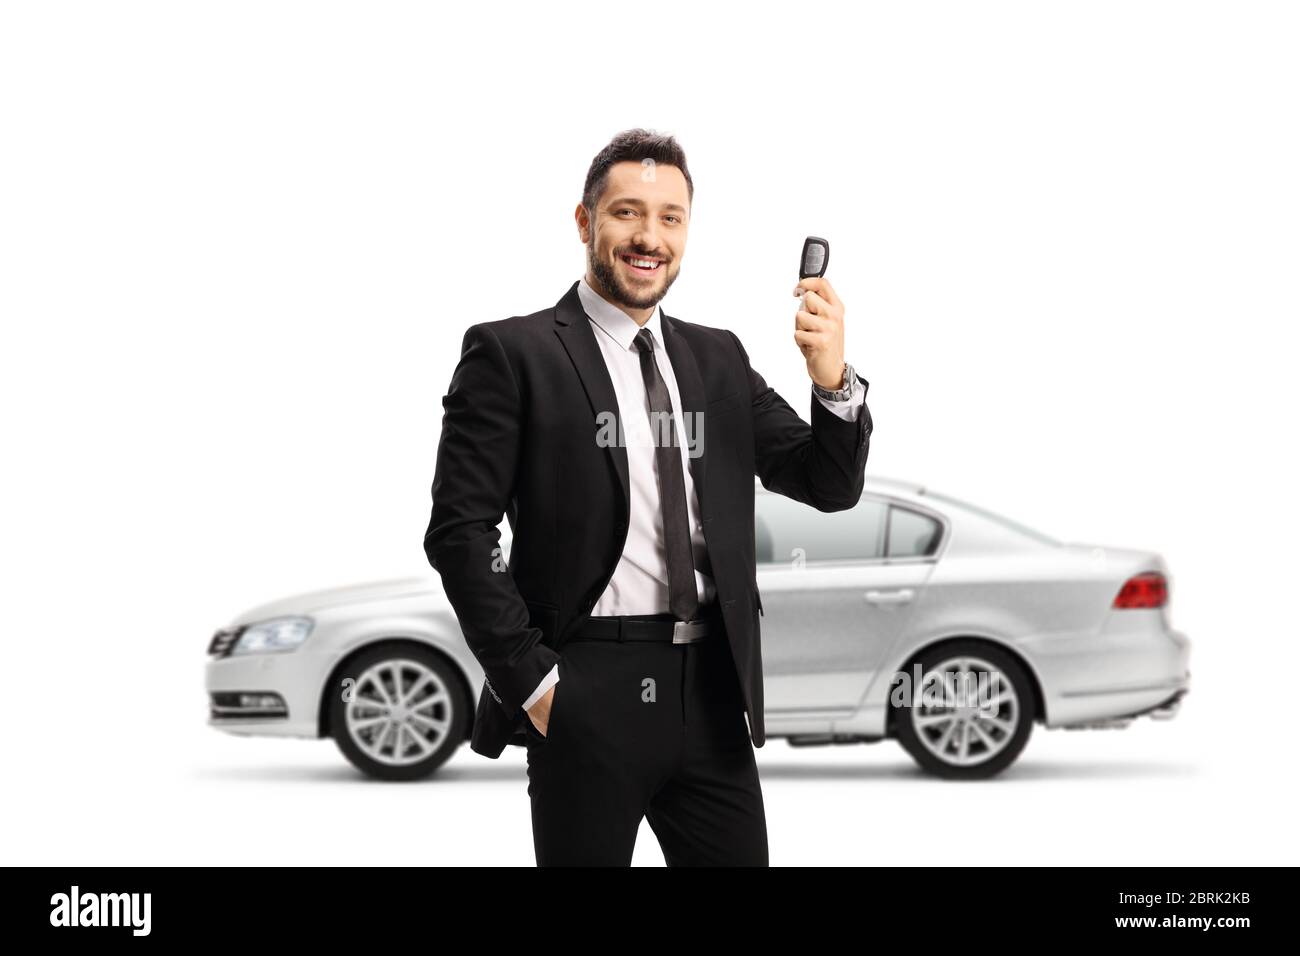 Man in a suit showing car keys and and standing in front of a silver car isolated on white background Stock Photo